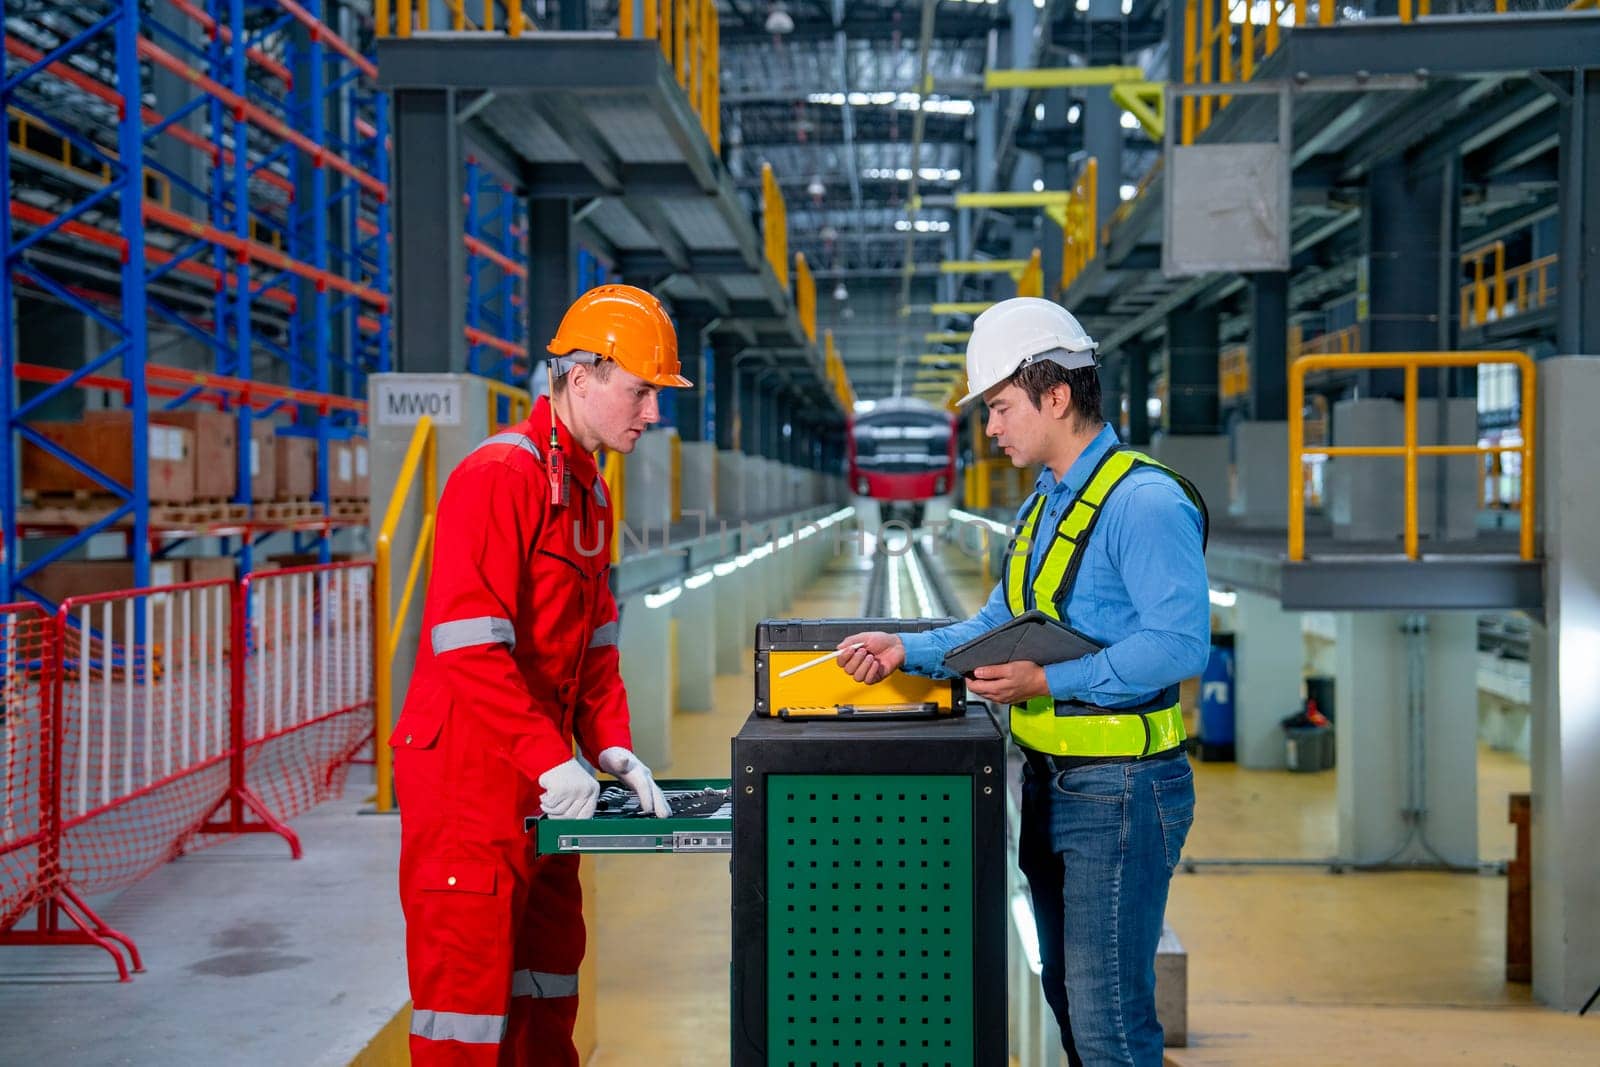 Technician and engineer worker discuss about tools and equipment with cabinet in front of railroad tracks of electrical or sky train in factory workplace.